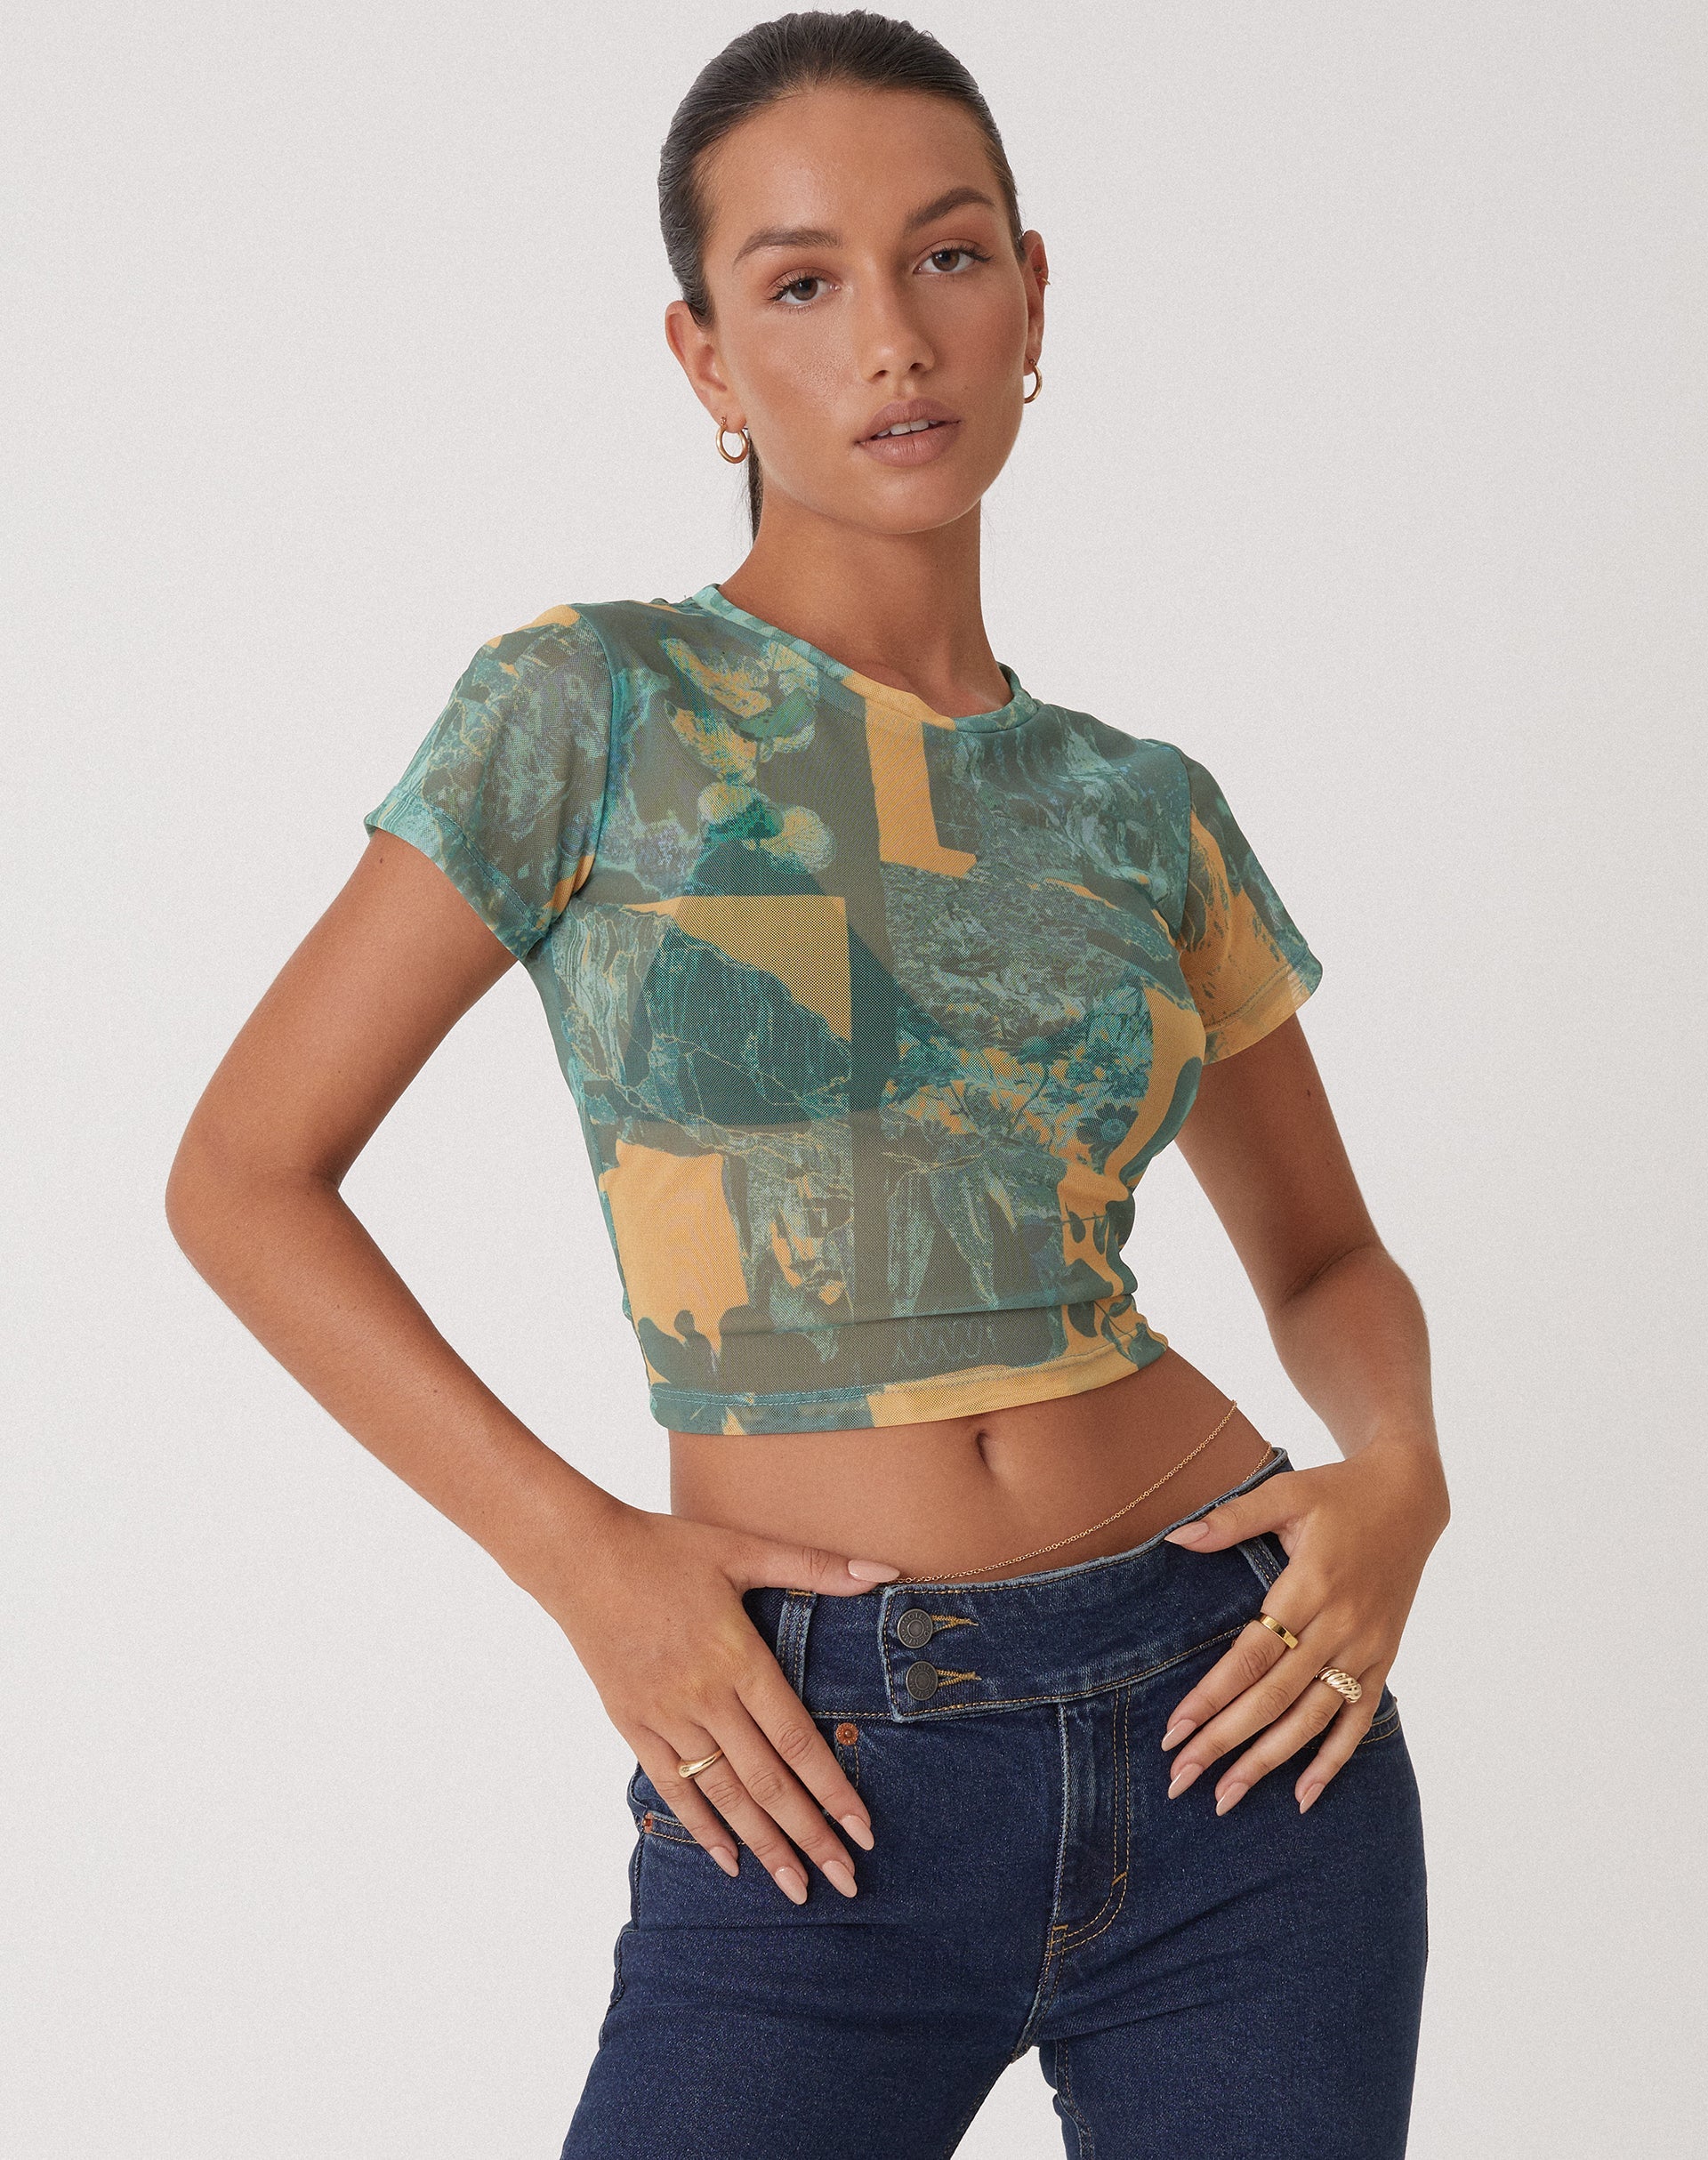 image of Motel x Olivia Neill Zora Top in Collage Floral Shadow Green